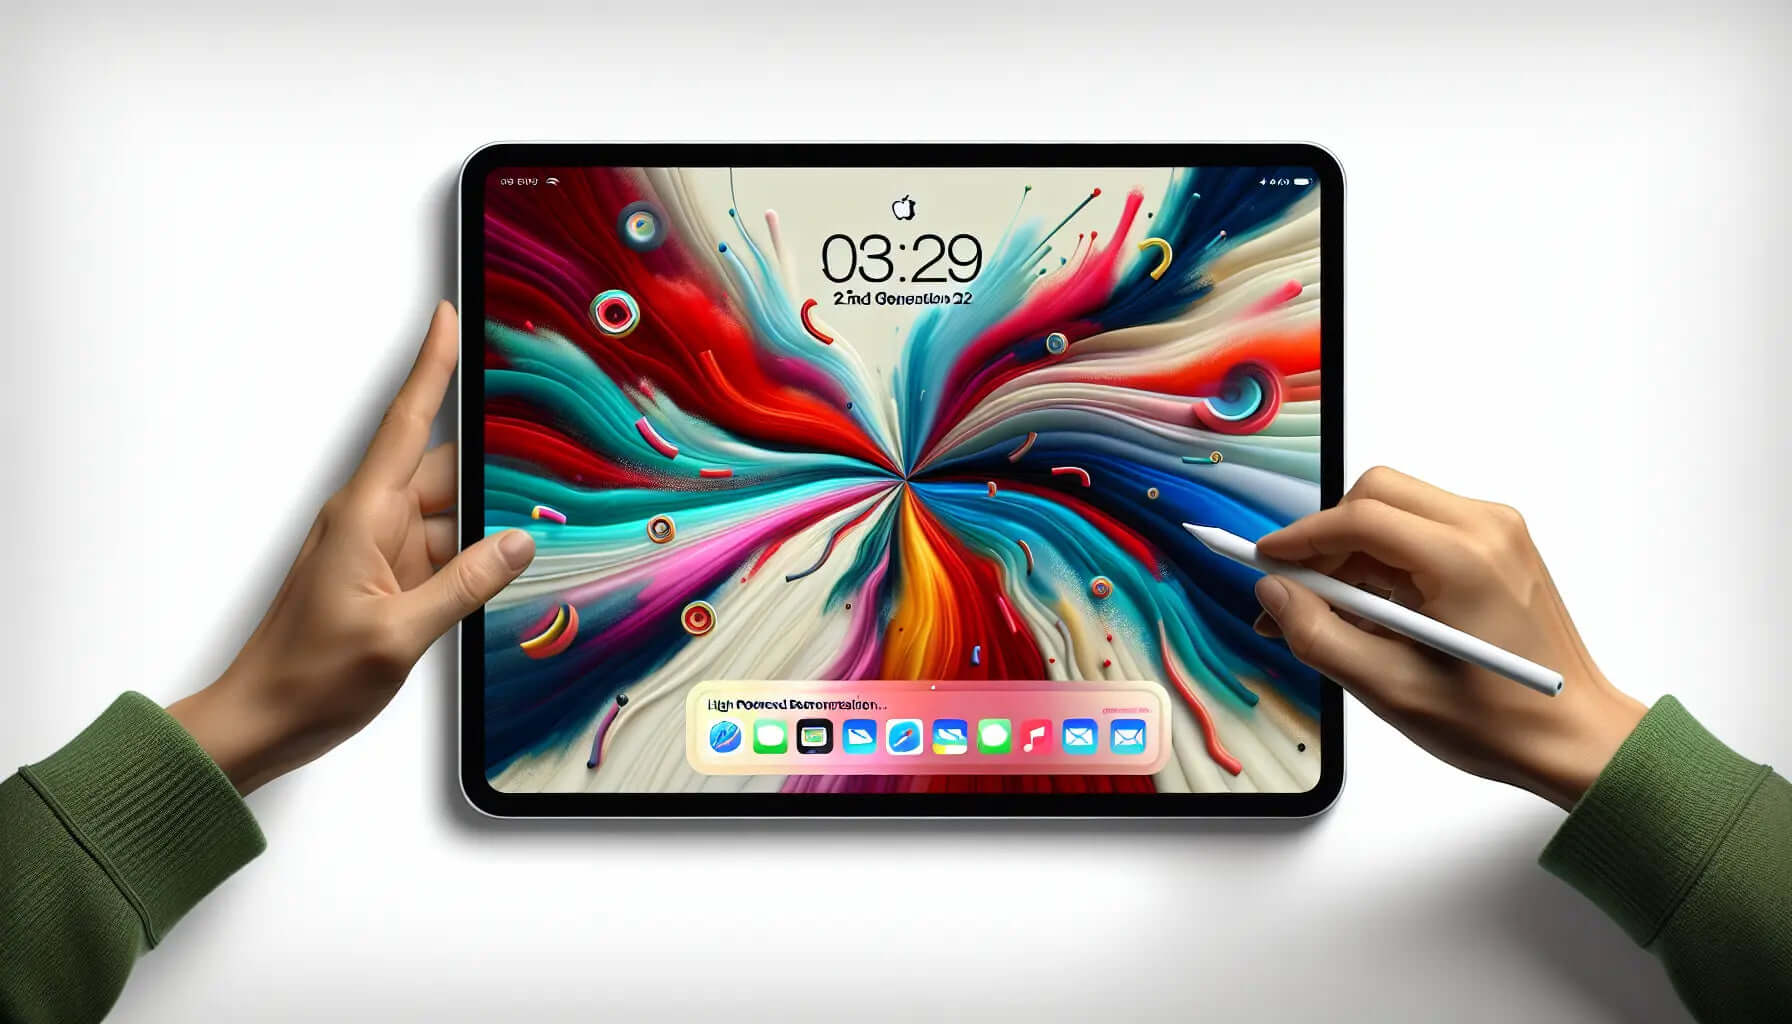 iPad Pro 12.9-inch (2nd Gen): A Budget-Friendly Alternative with Great Features